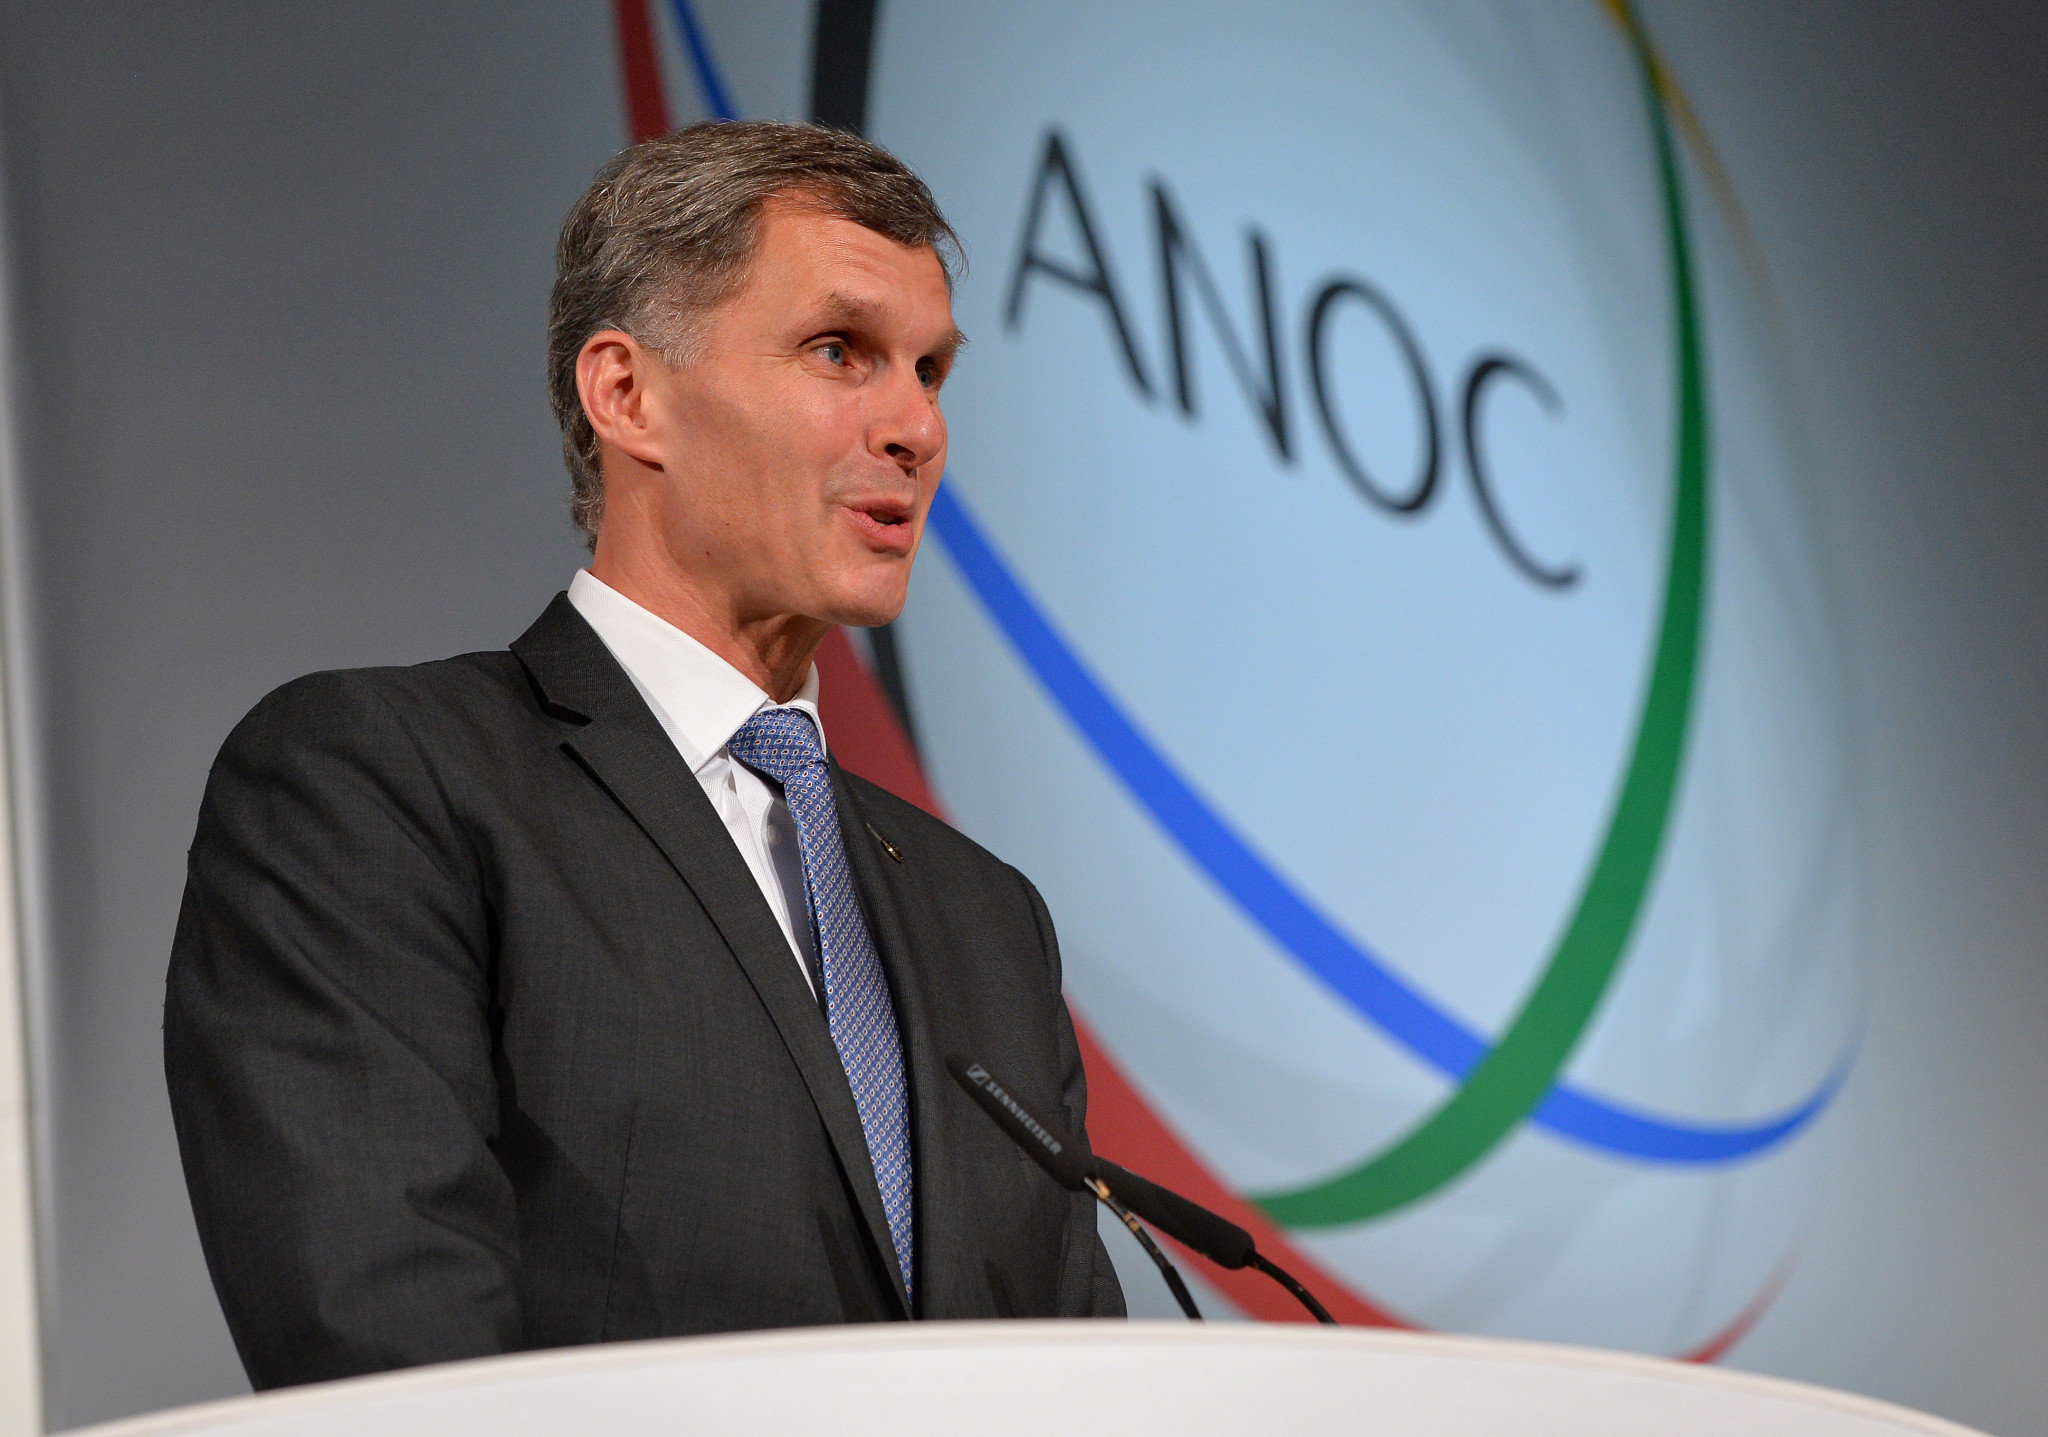 ČOV President Jiří Kejval remains hopeful he will become an IOC member next year ©Getty Images